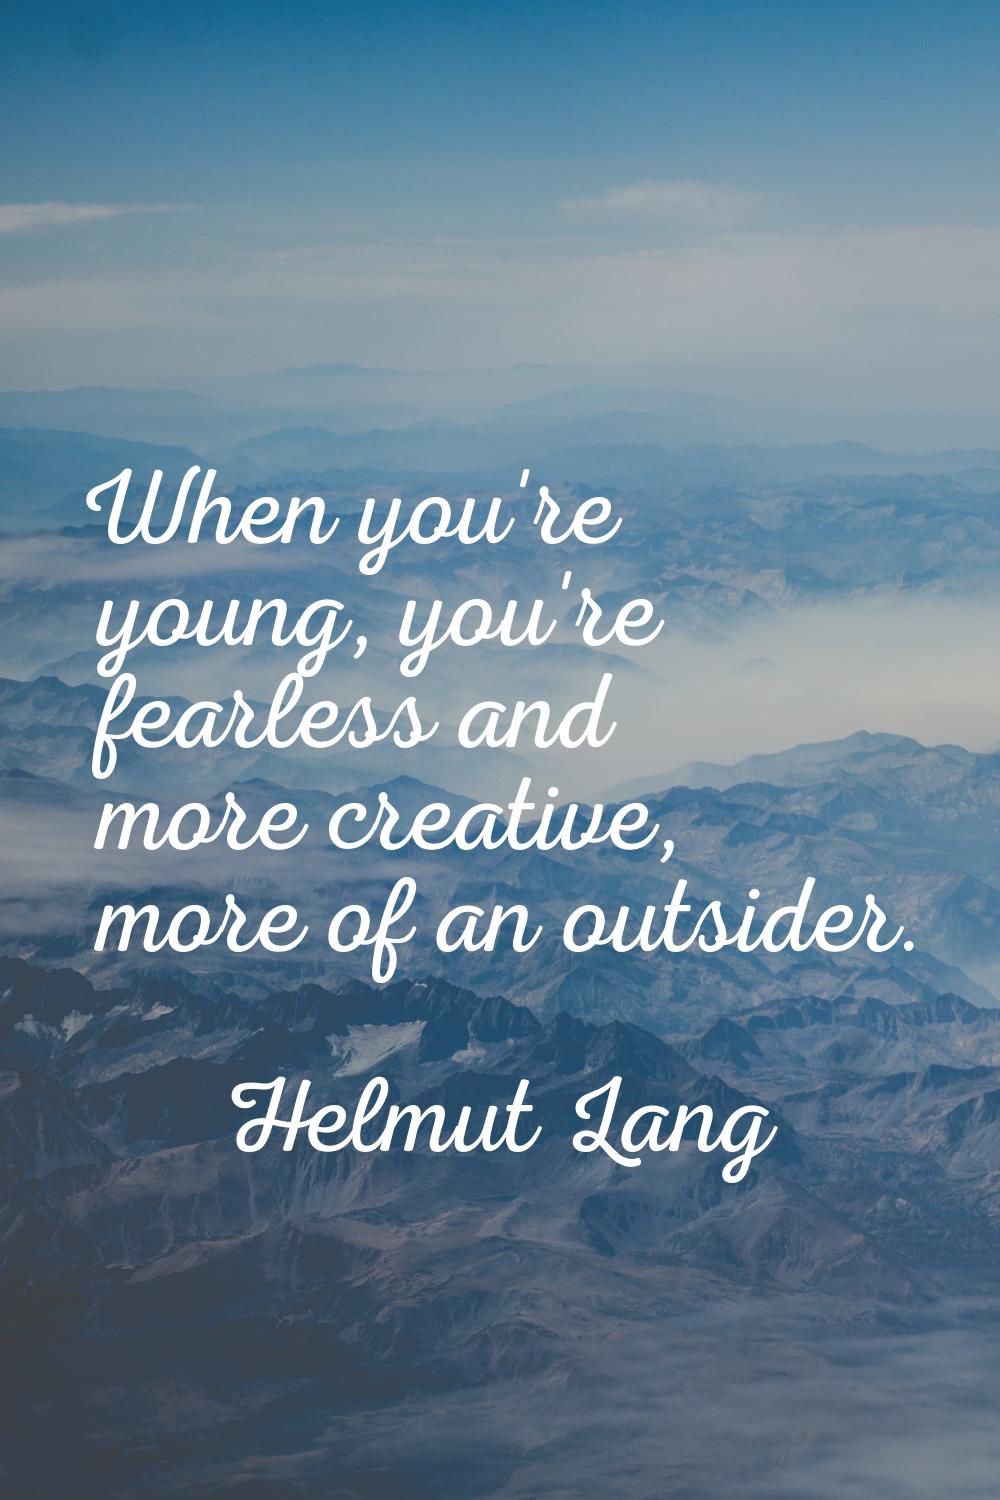 When you're young, you're fearless and more creative, more of an outsider.